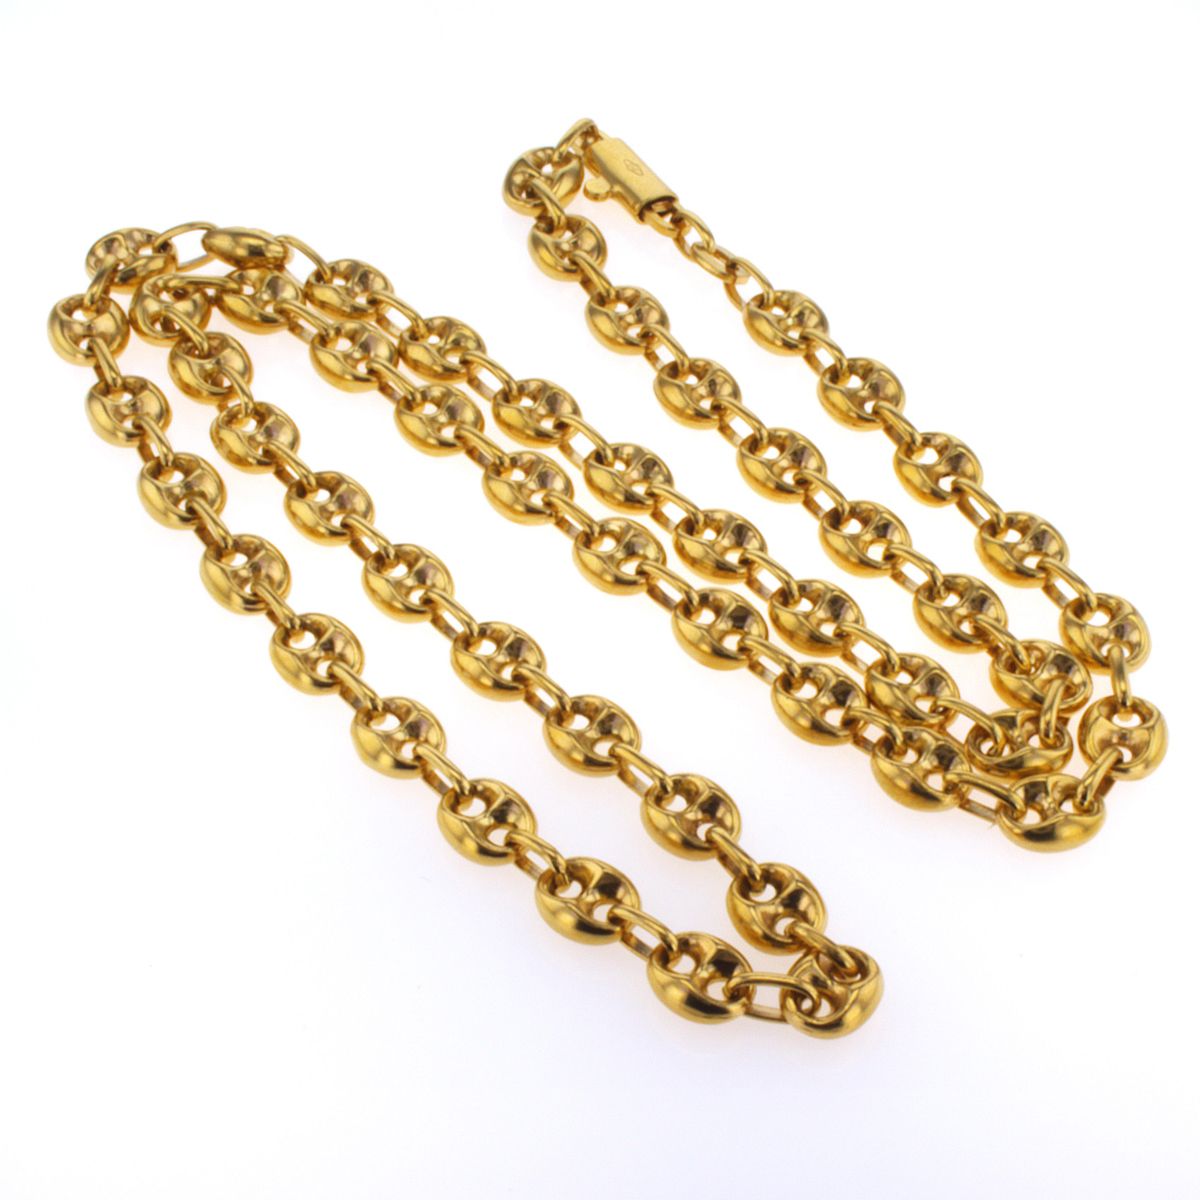 14k Gold Large Open Link Chain Necklace - Zoe Lev Jewelry-vachngandaiphat.com.vn